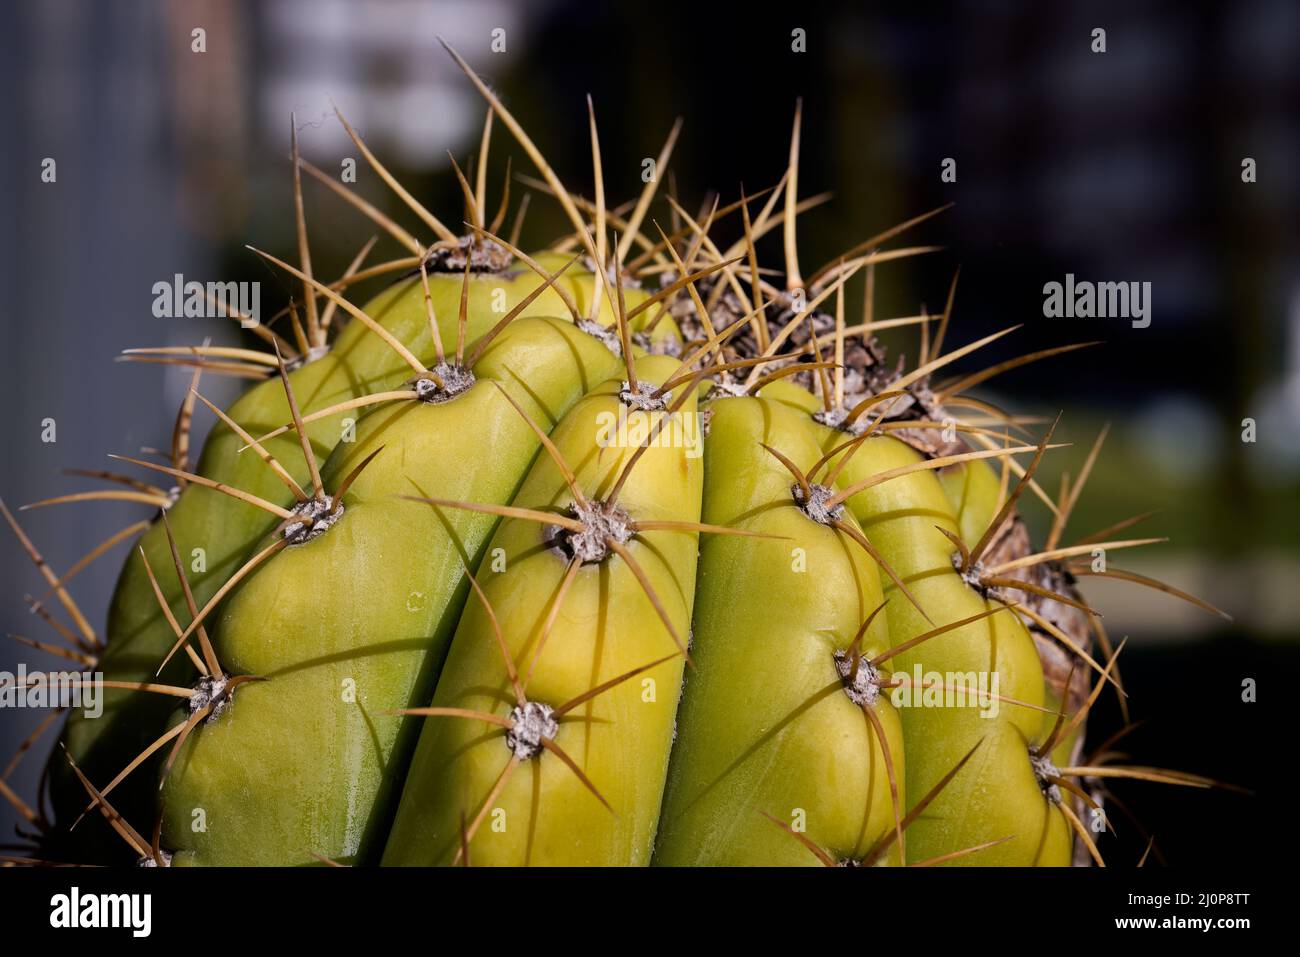 Homegrown hardy cactus variety and view of its spikes Stock Photo